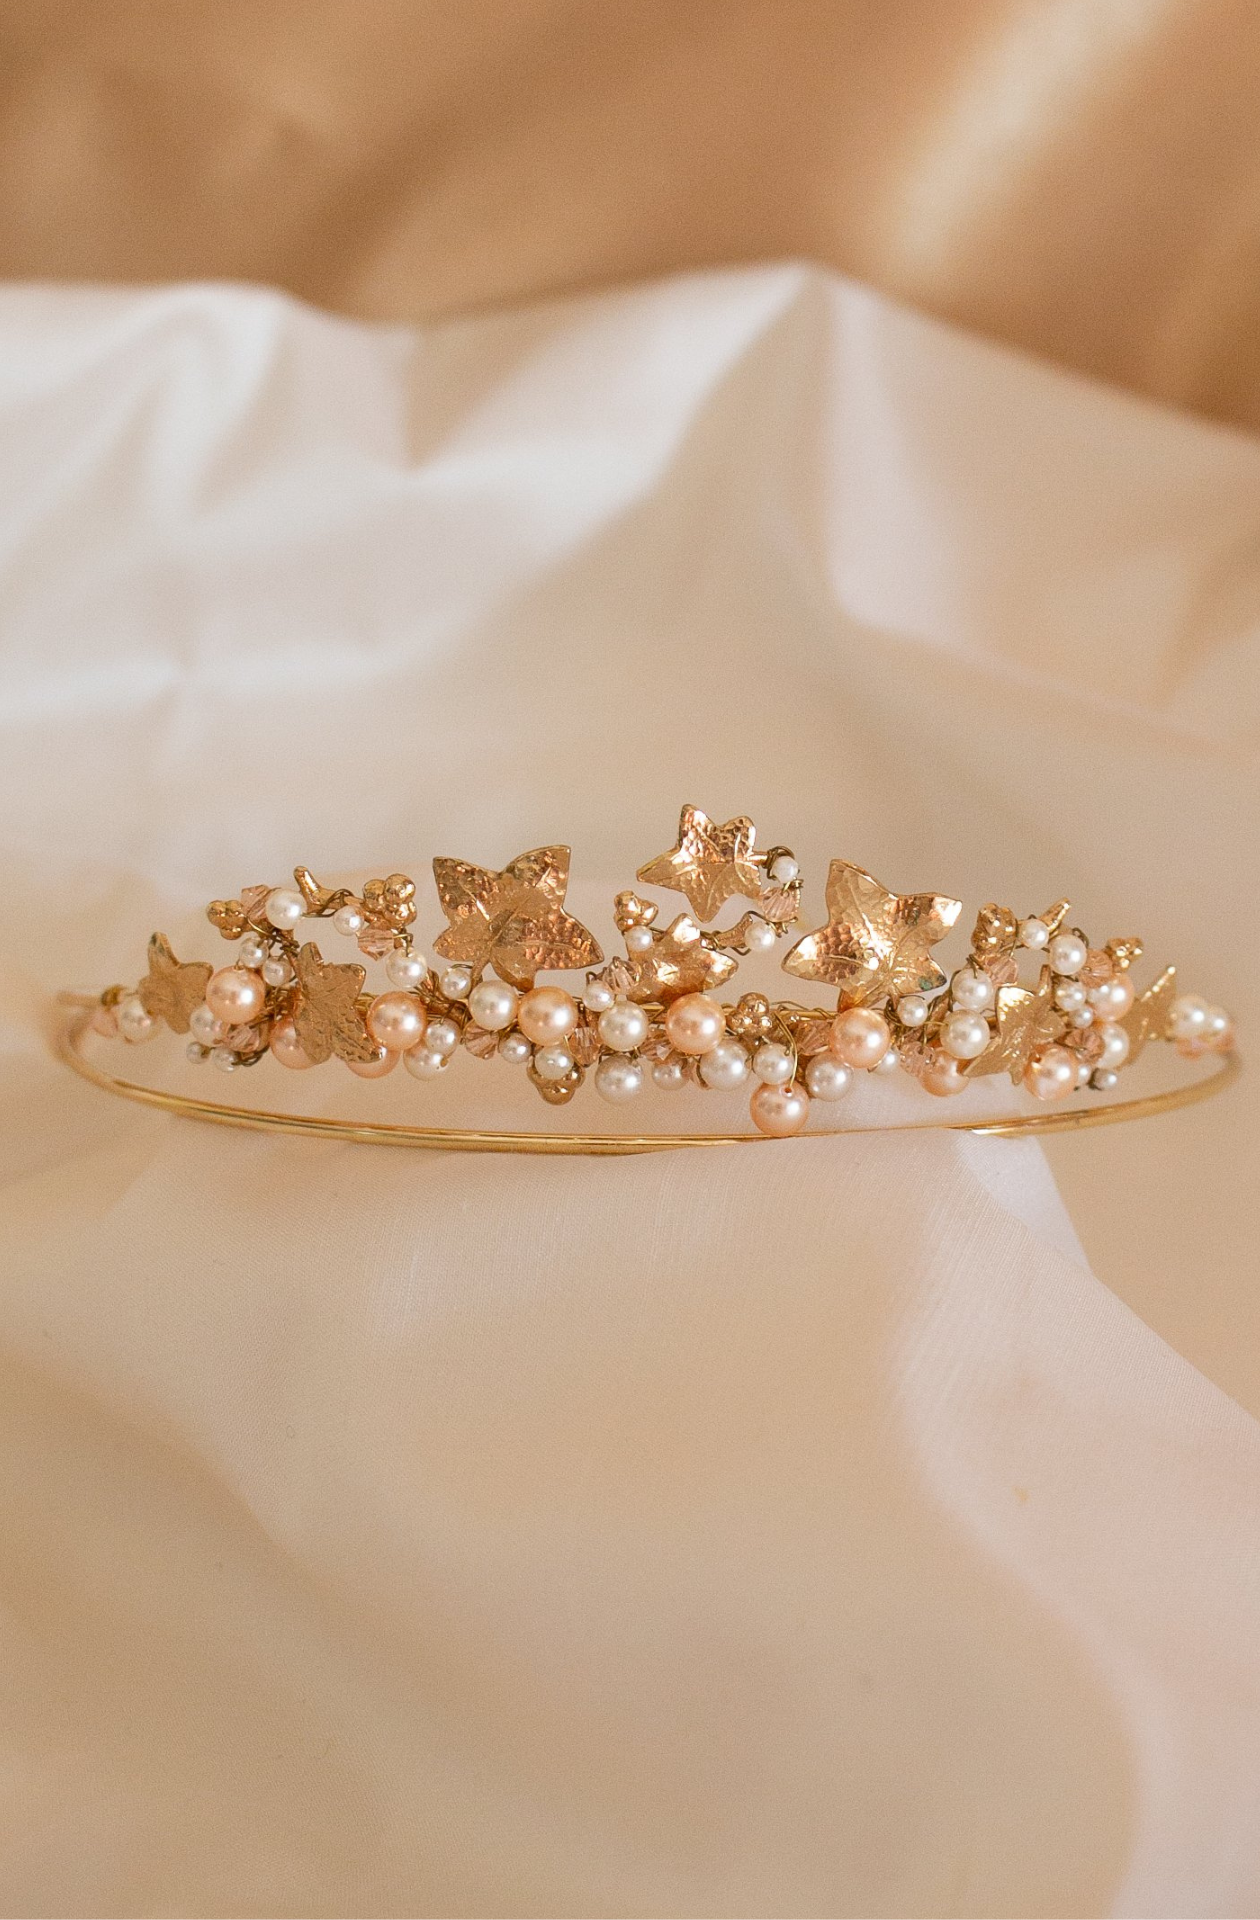 A handmade Swarovski white Pearl and Crystal Headpiece. A circular gold band holding the gems between a variety of floral and leaf metal shapes. A side angle shot